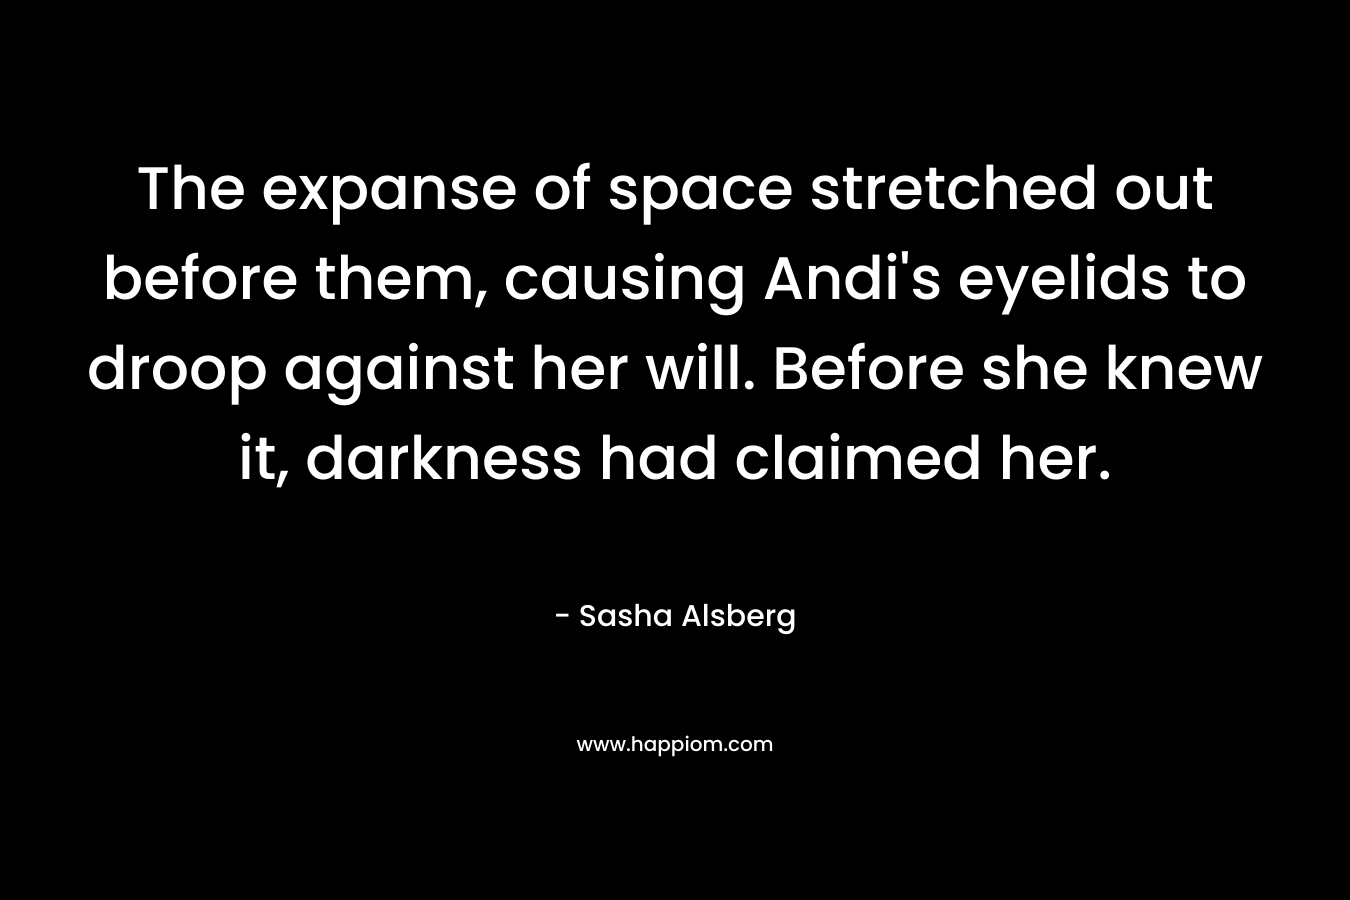 The expanse of space stretched out before them, causing Andi's eyelids to droop against her will. Before she knew it, darkness had claimed her.